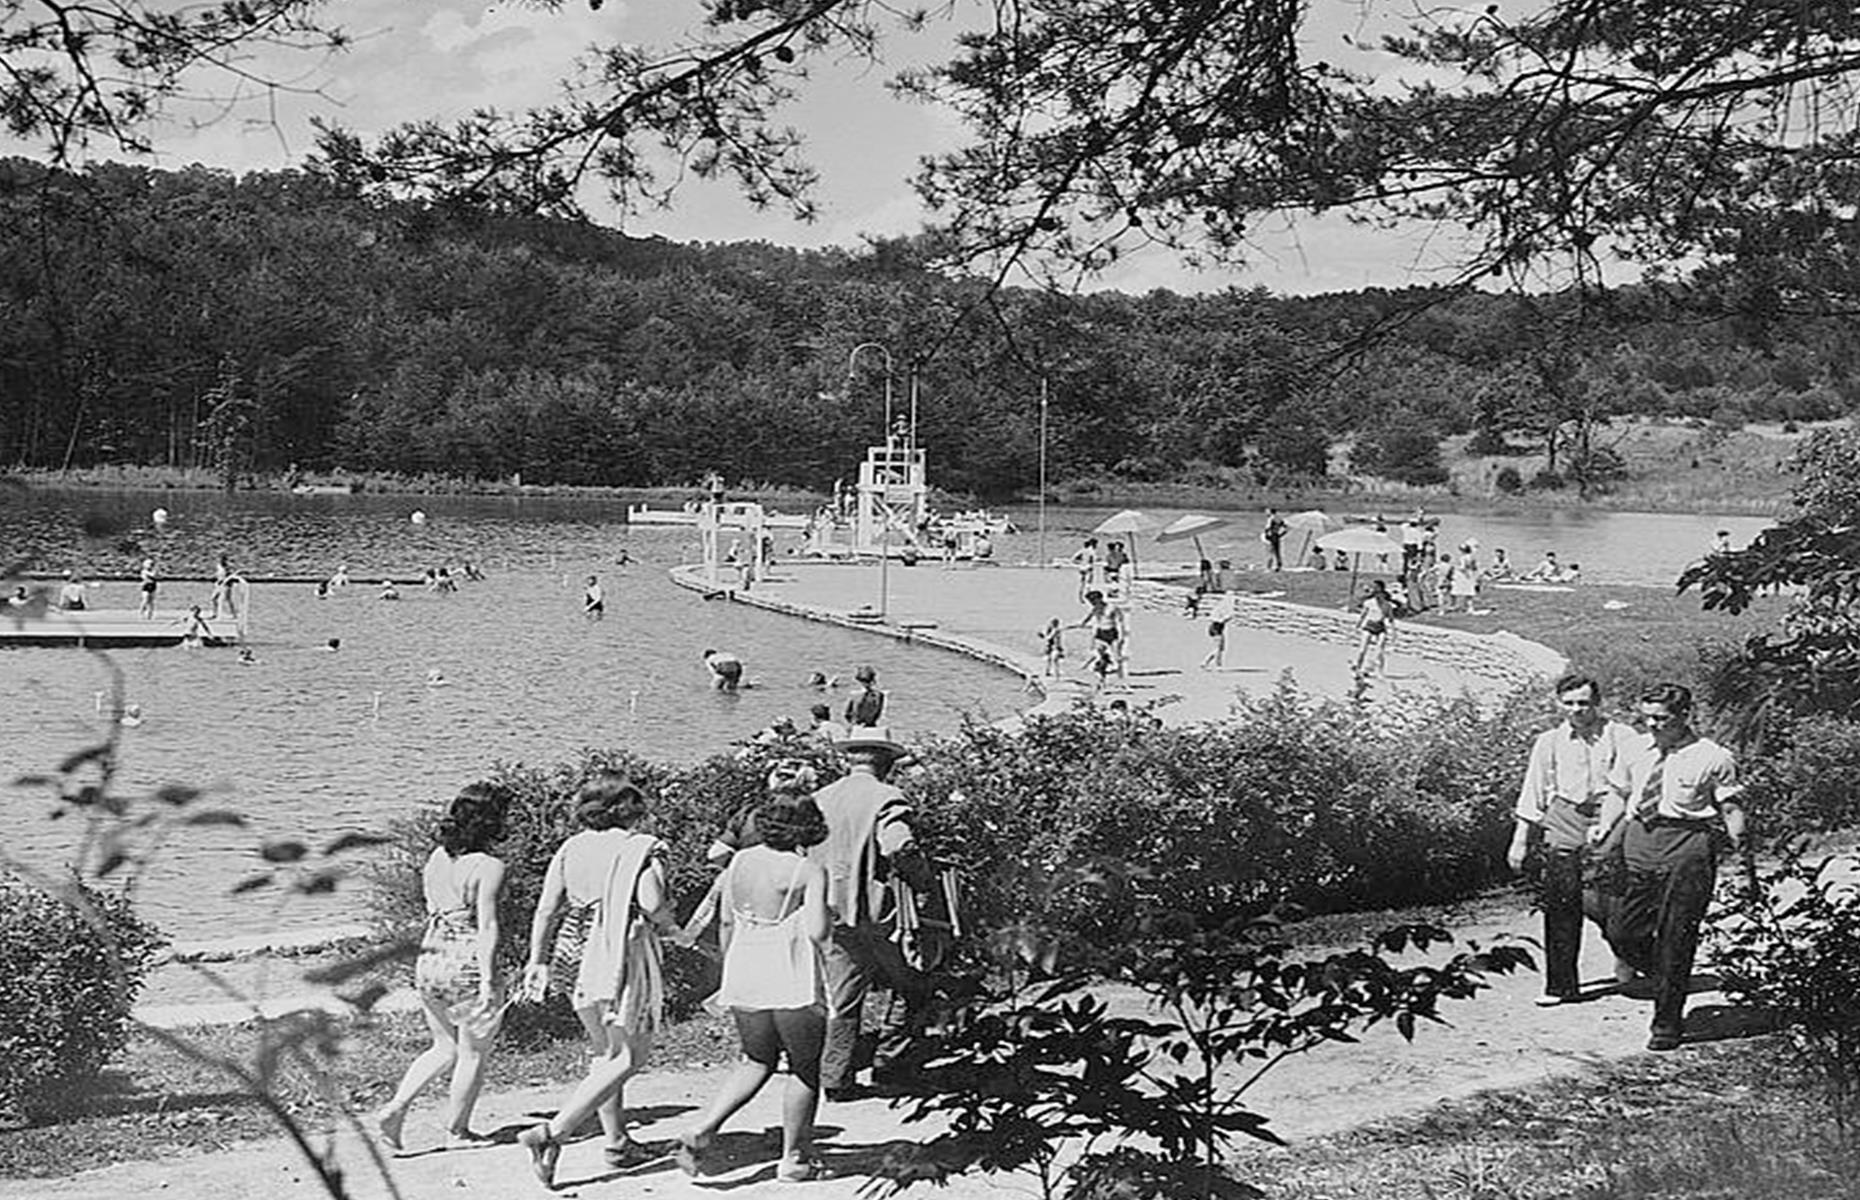 <p>Vacationers in Tennessee had plenty of natural wonders to enjoy too. Here tourists can be seen around Big Ridge Lake, with its bathhouse, beach, diving tower and string of vacation cabins. This photo dates to the 1930s and shows the lake and its surroundings abuzz with swimmers and sunbathers.</p>  <p><strong><a href="https://www.loveexploring.com/galleries/95160/americas-most-beautiful-lakes-in-pictures?page=1">These are America's most beautiful lakes</a></strong></p>